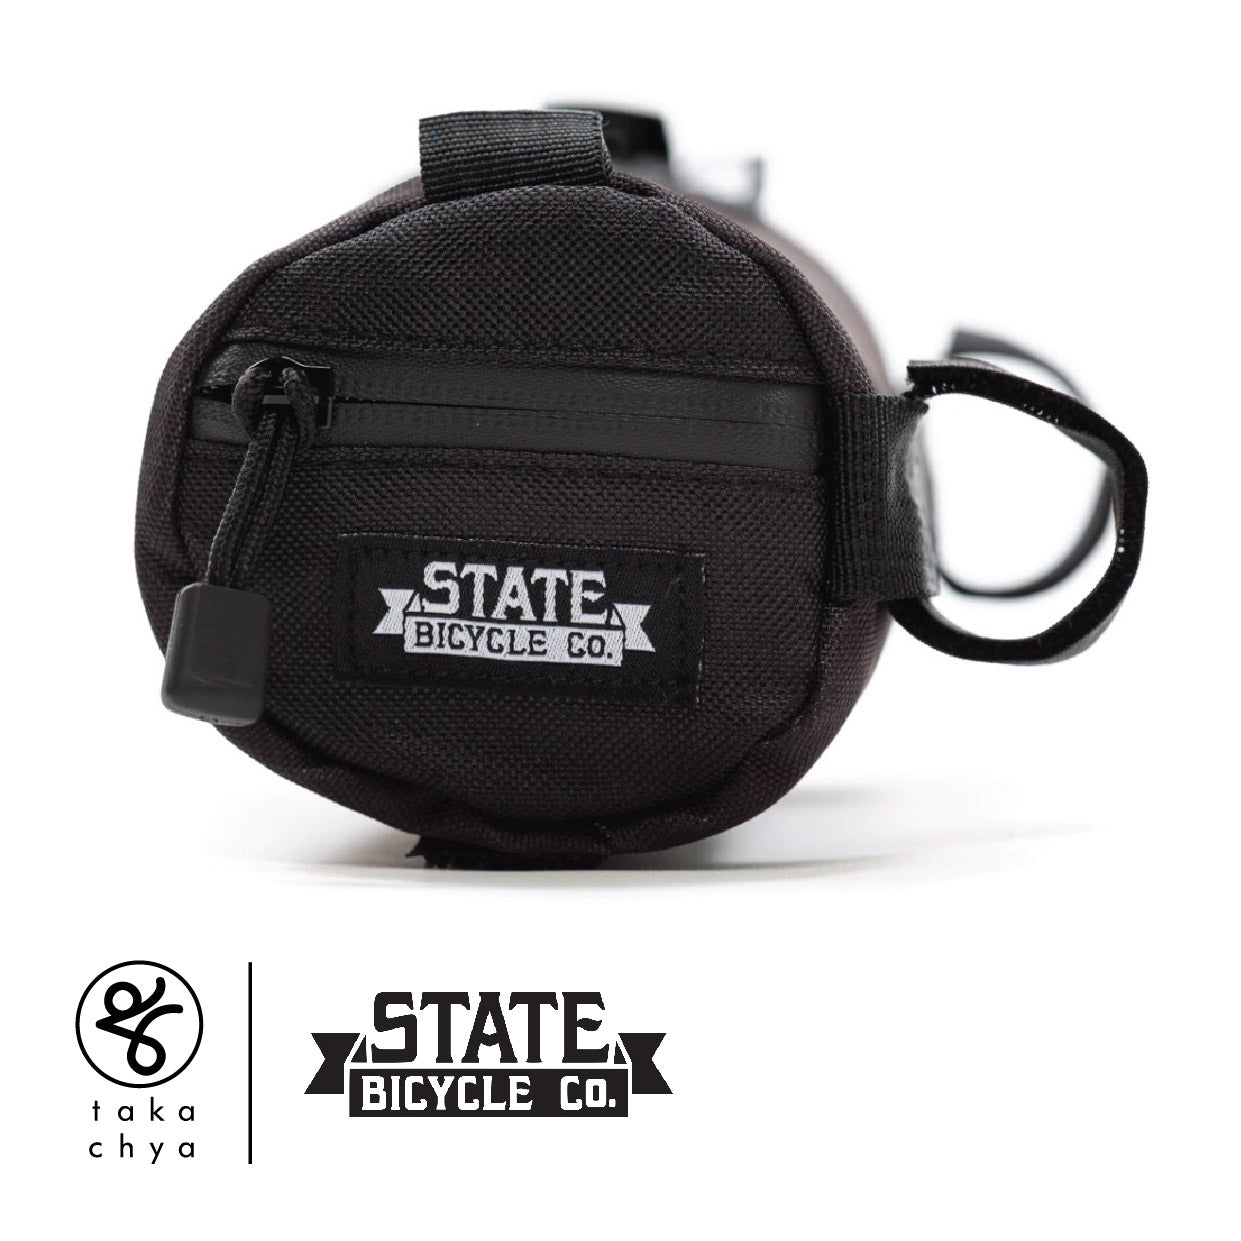 STATE BICYCLE CO. X THE GRATEFUL DEAD LIMITED EDITION - "DANCING BEARS" ALL-ROAD BAR BAG